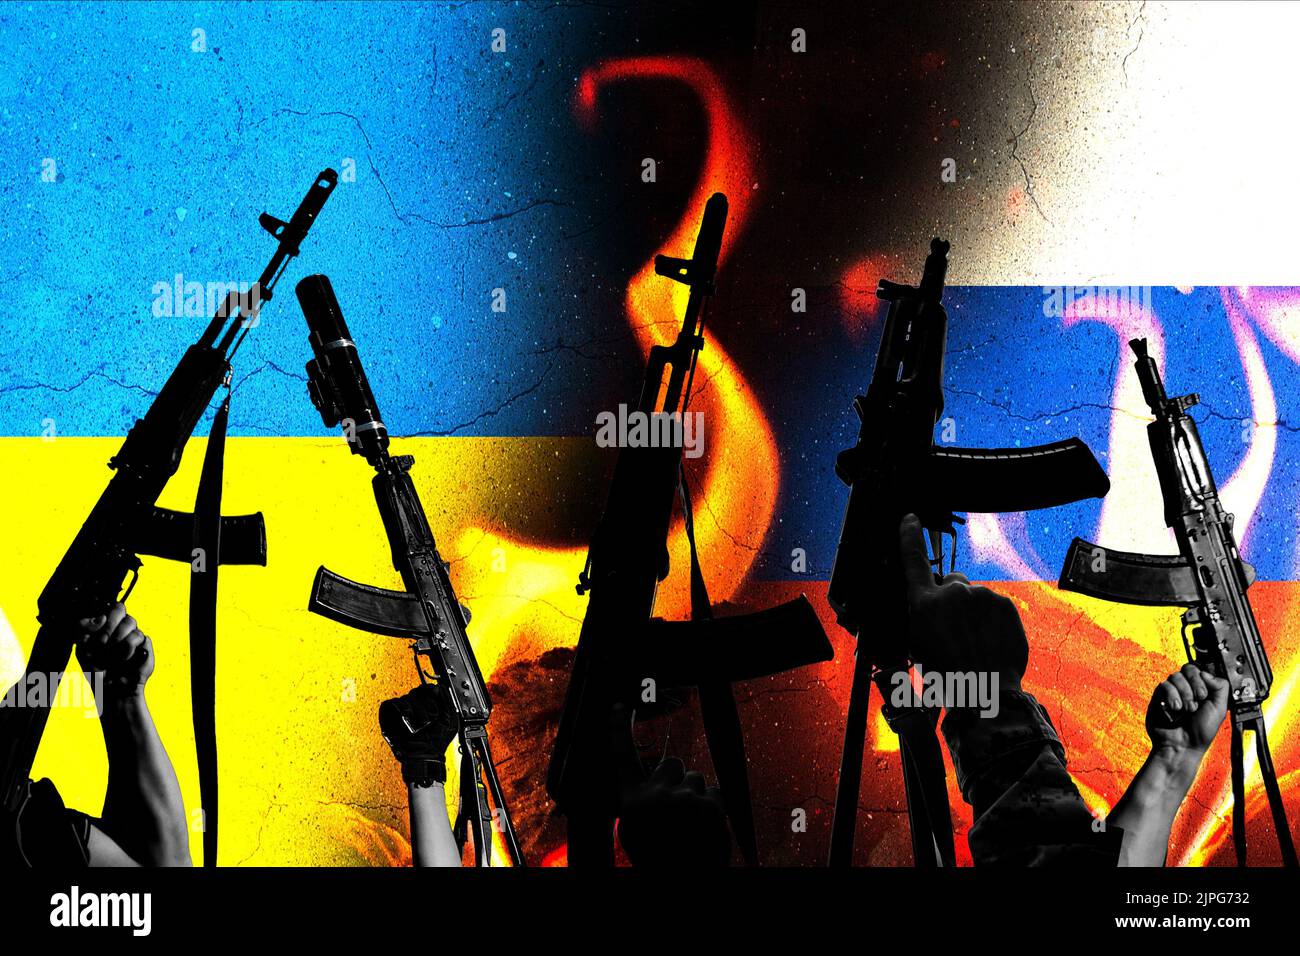 Two enemy flags and combat military assault rifles AK 74 and AK 74U on their background in destruction and fire. Stock Photo